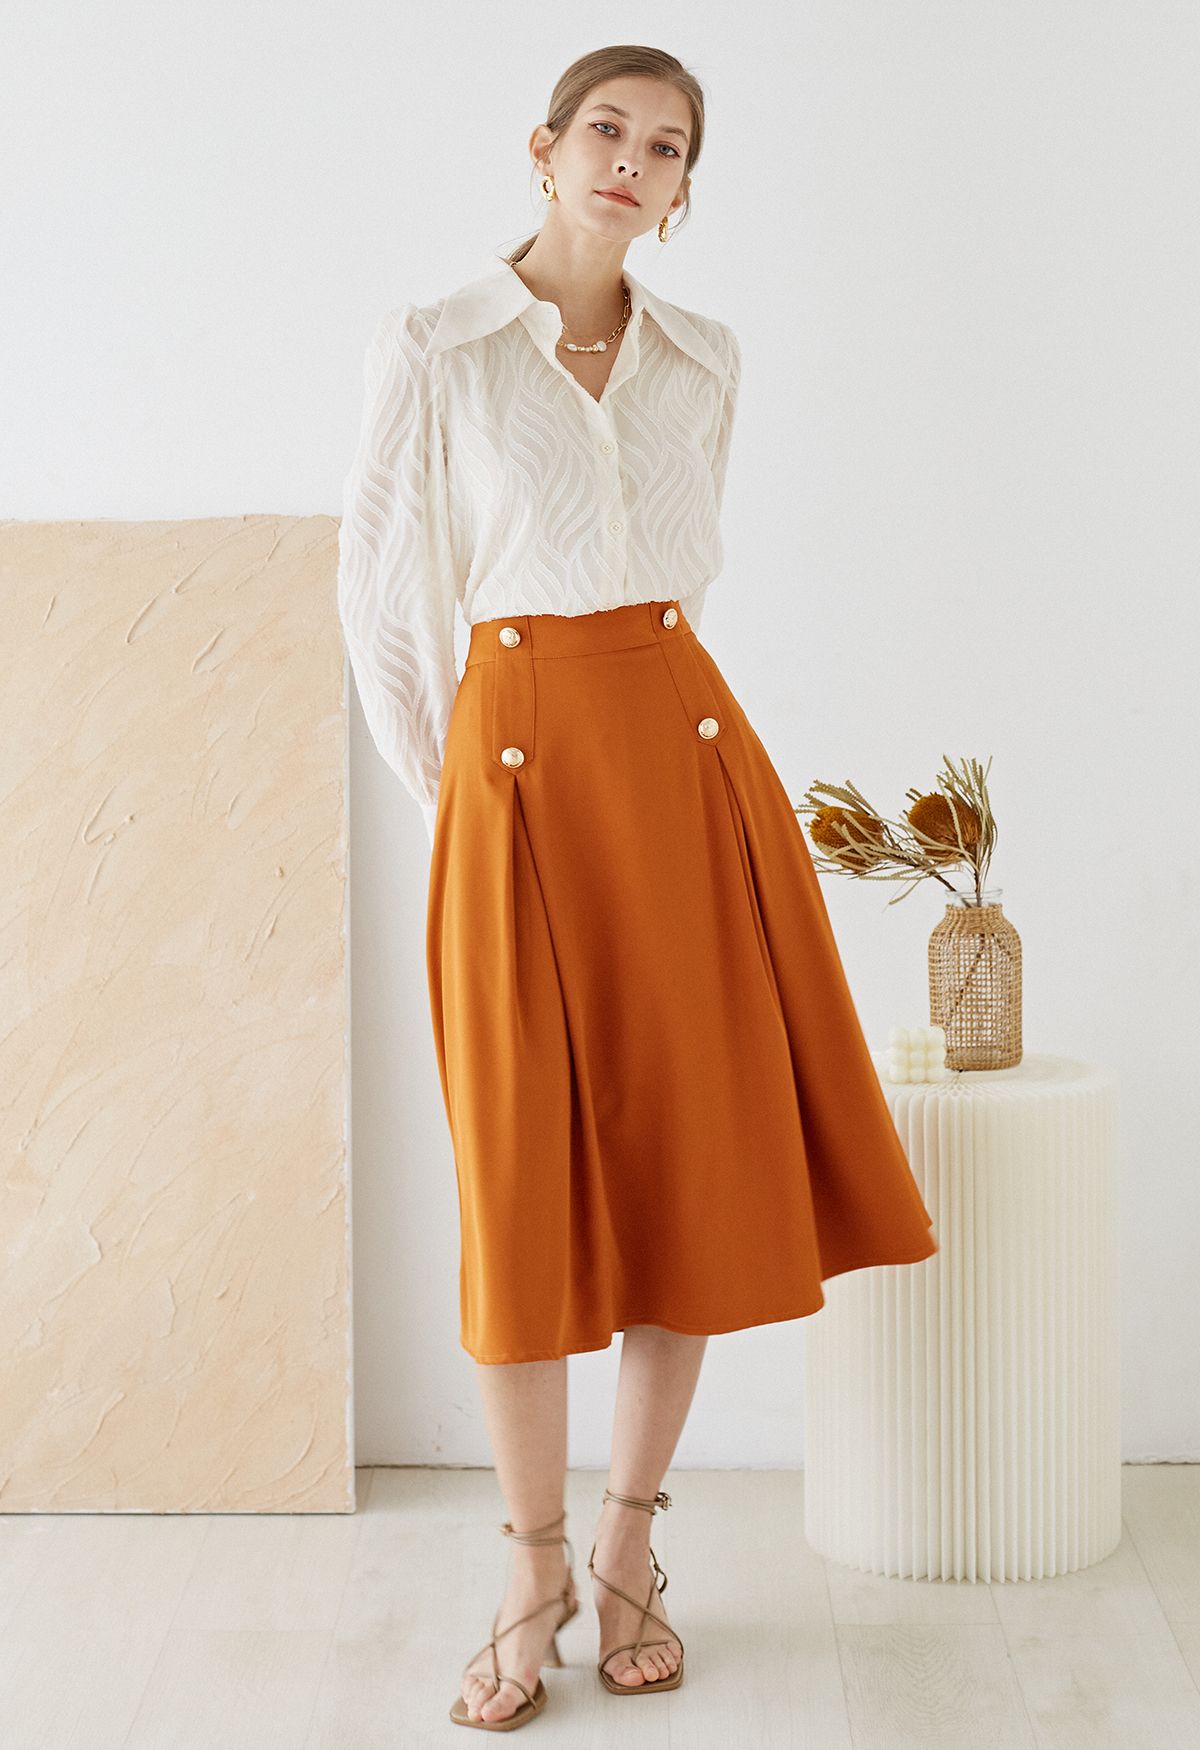 Buttoned Pleated A-Line Skirt in Pumpkin